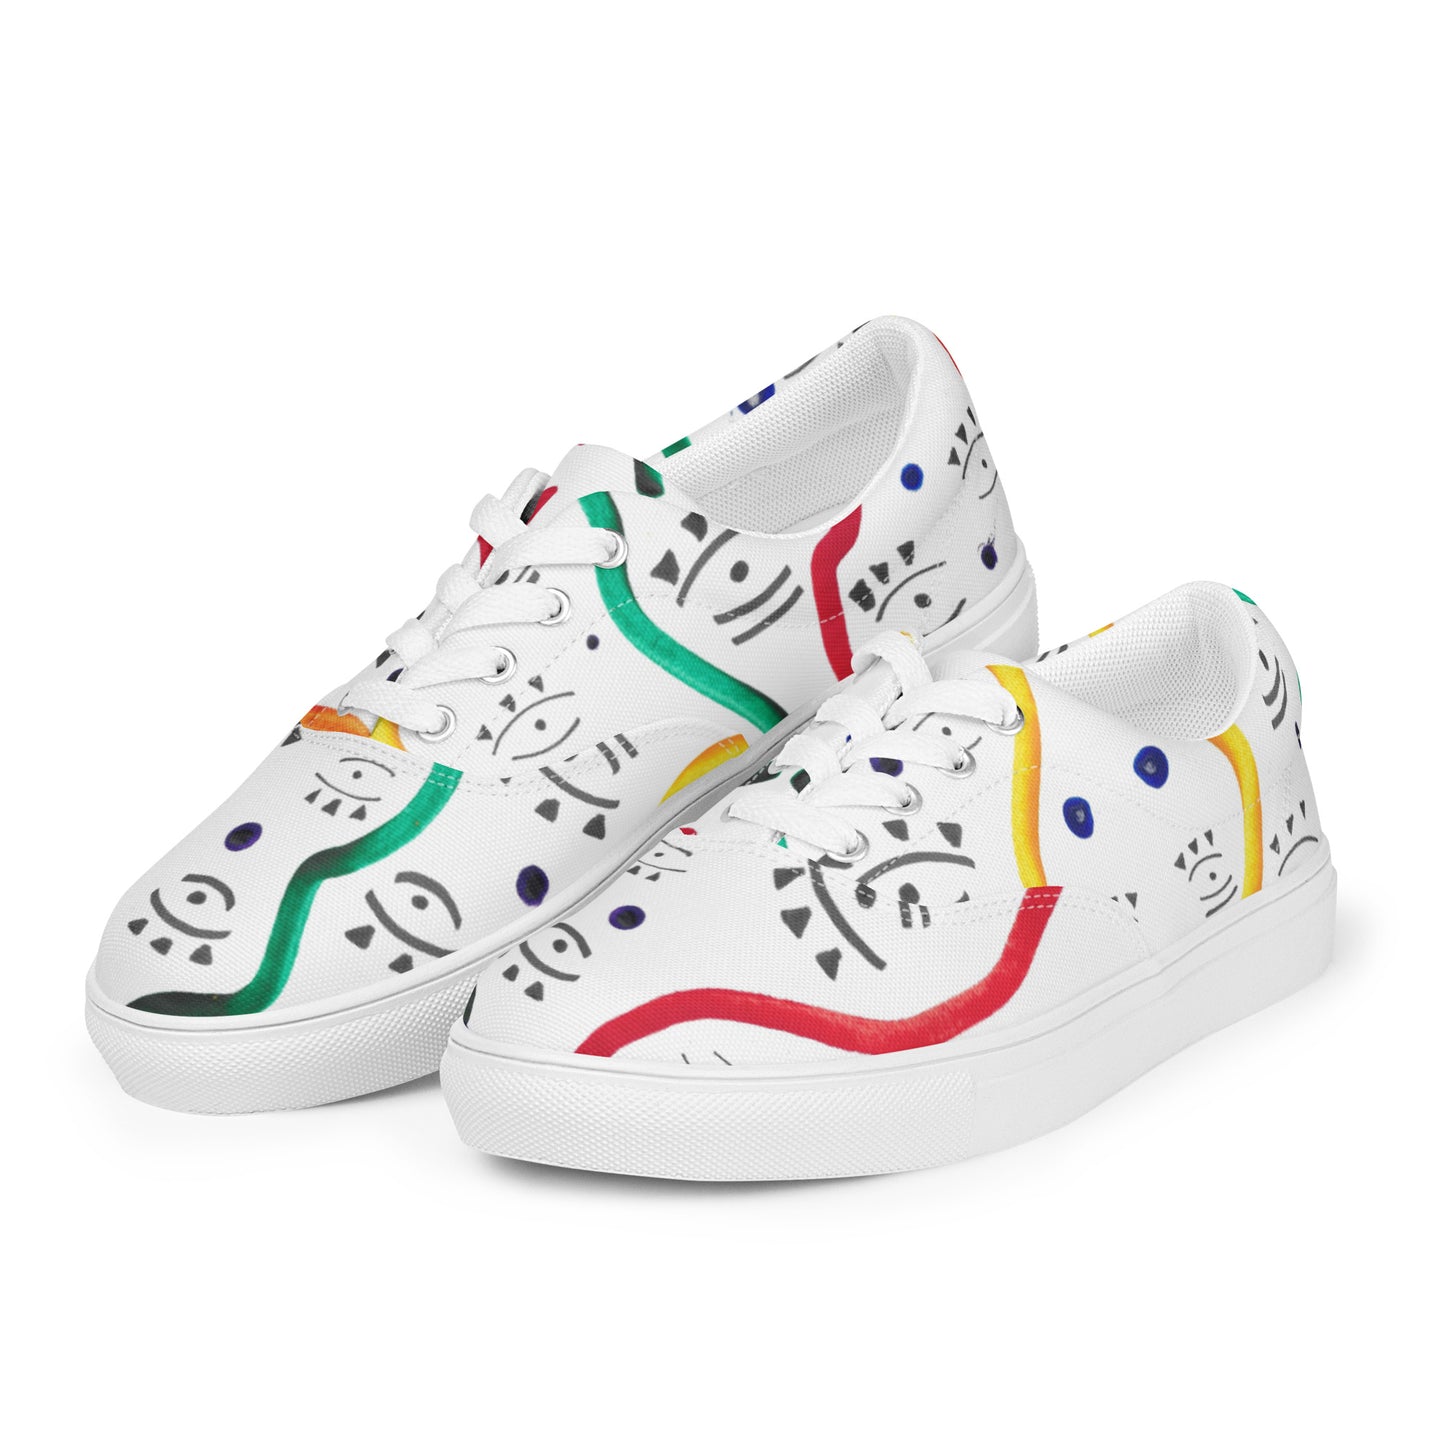 THE EYE - Women's canvas trainers with laces